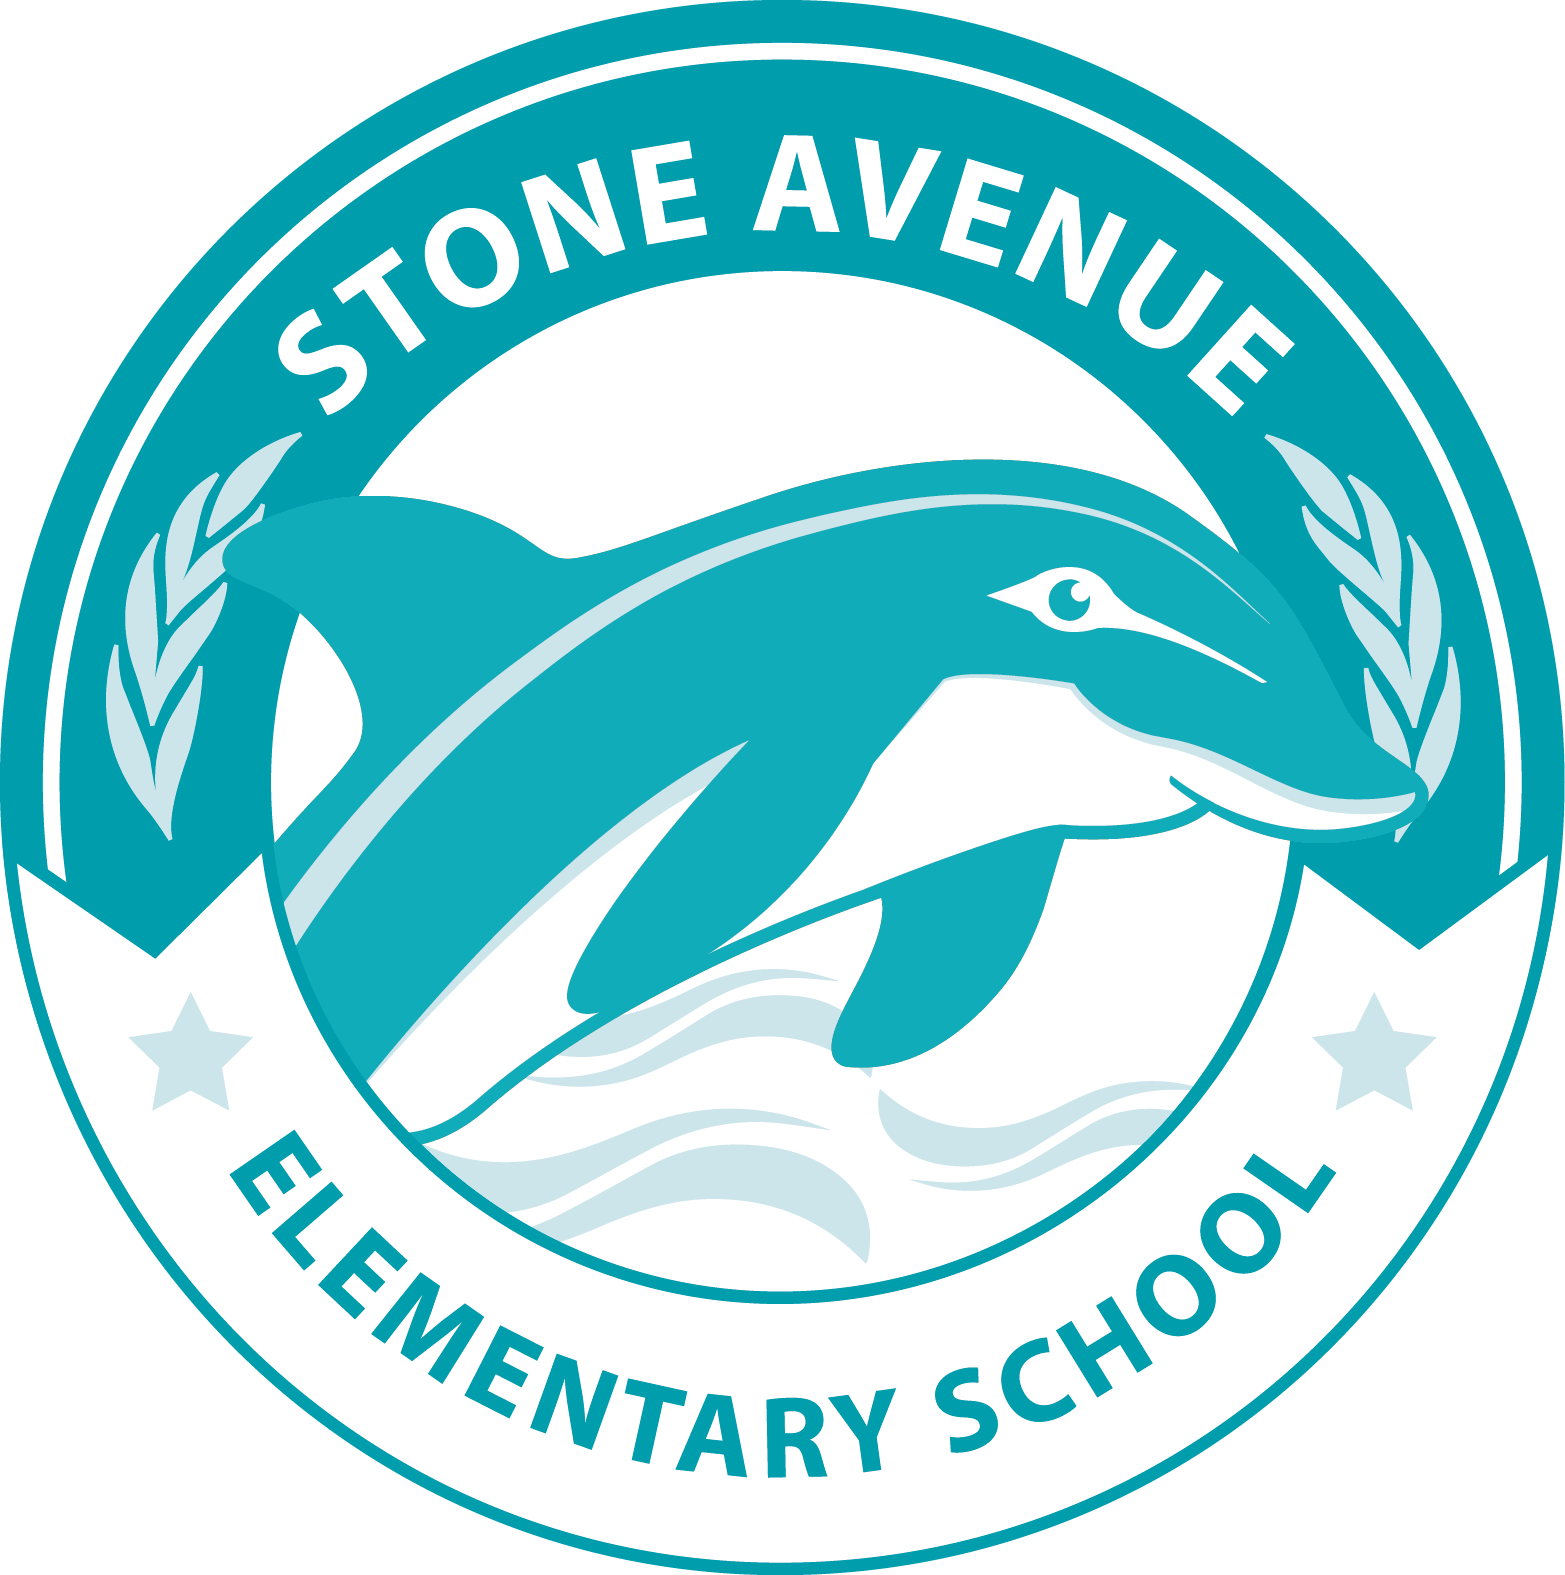 Stone Ave logo.png